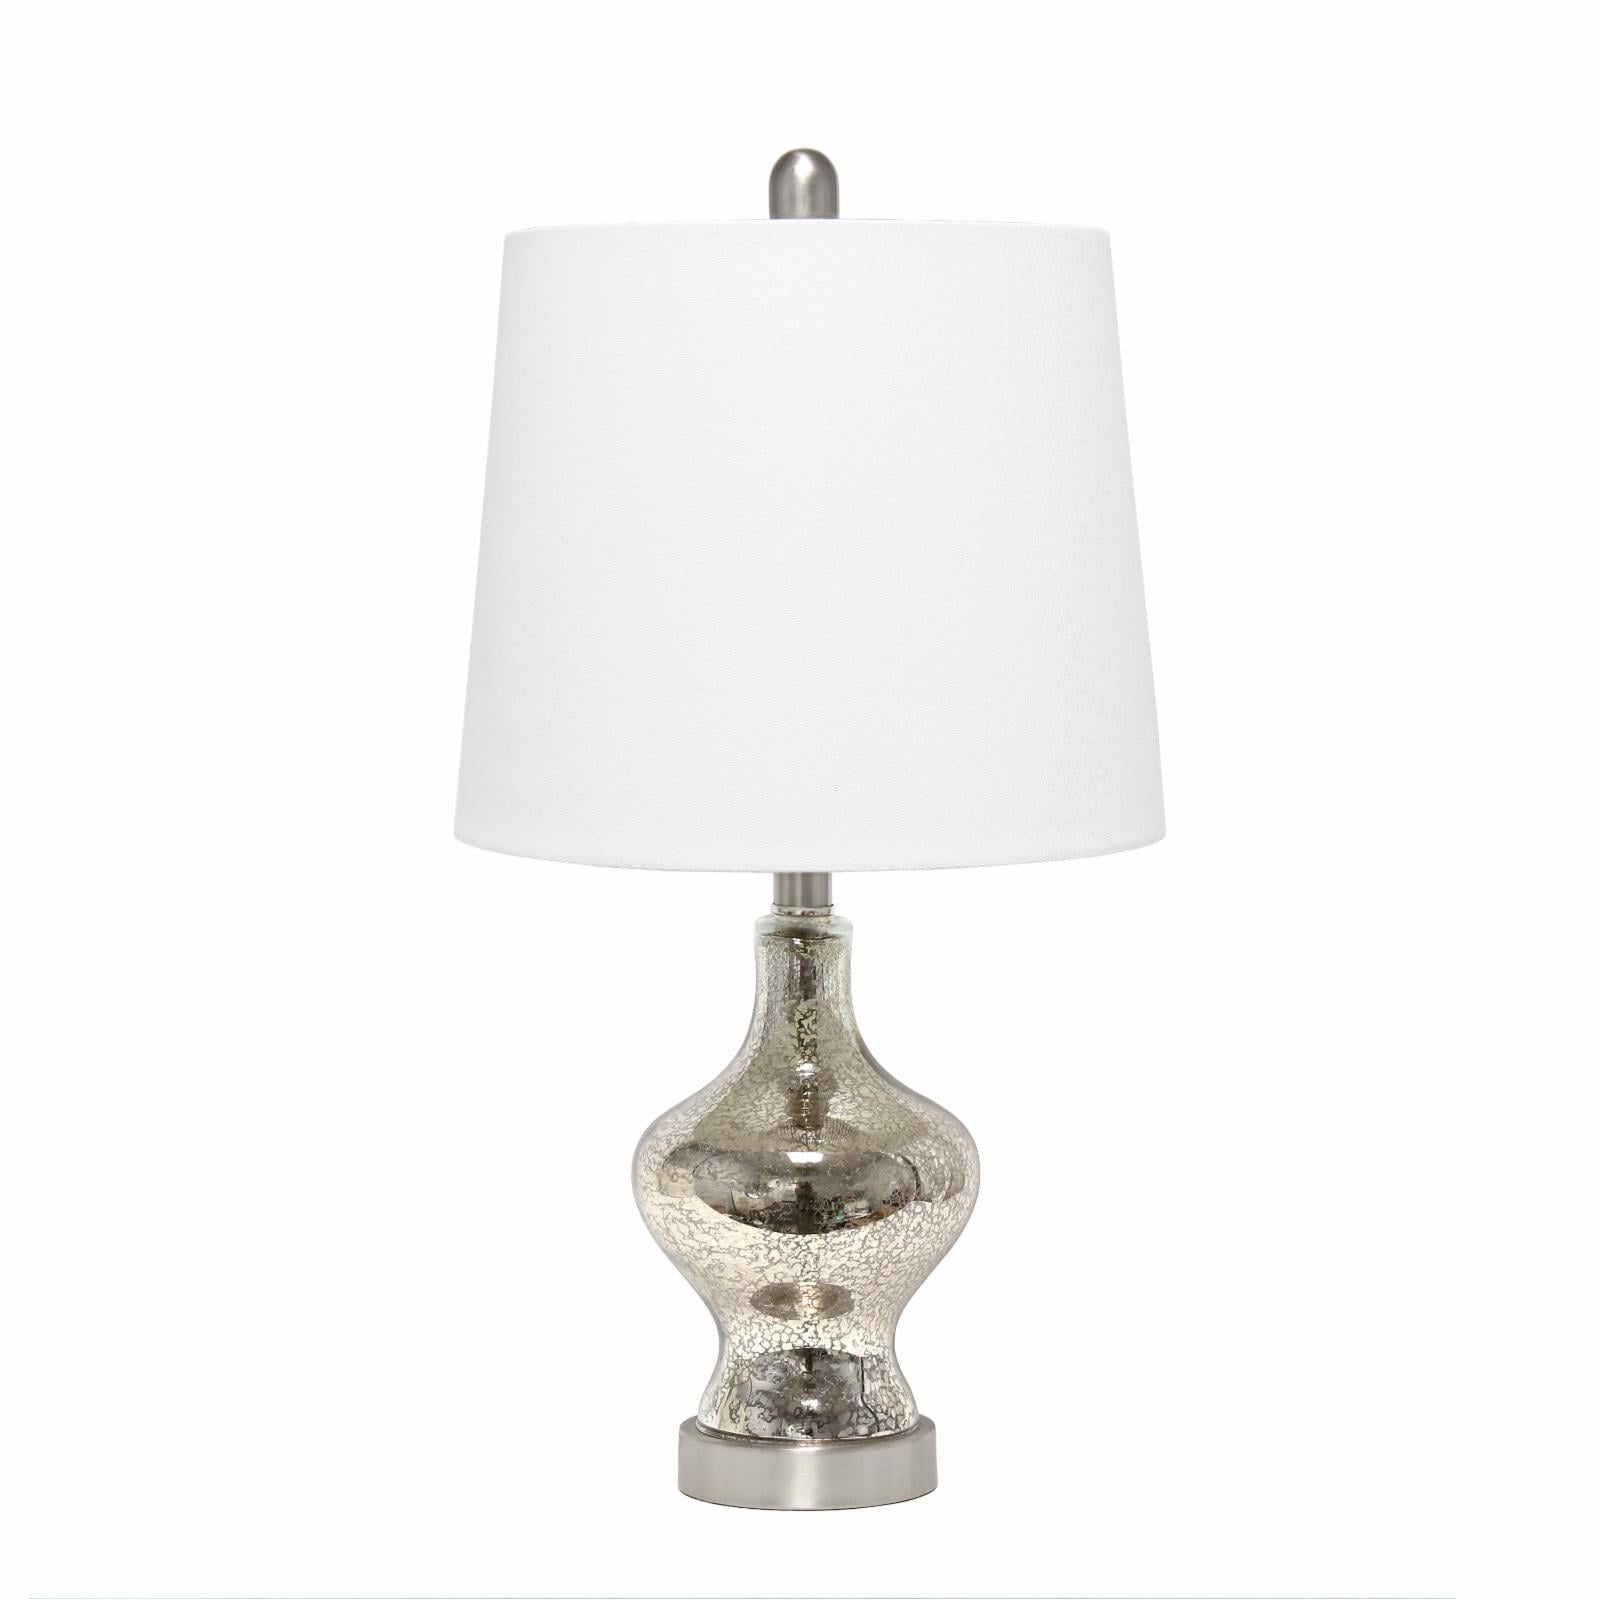  Lalia Home Paseo Table Lamp with White Fabric Shade, Mercury